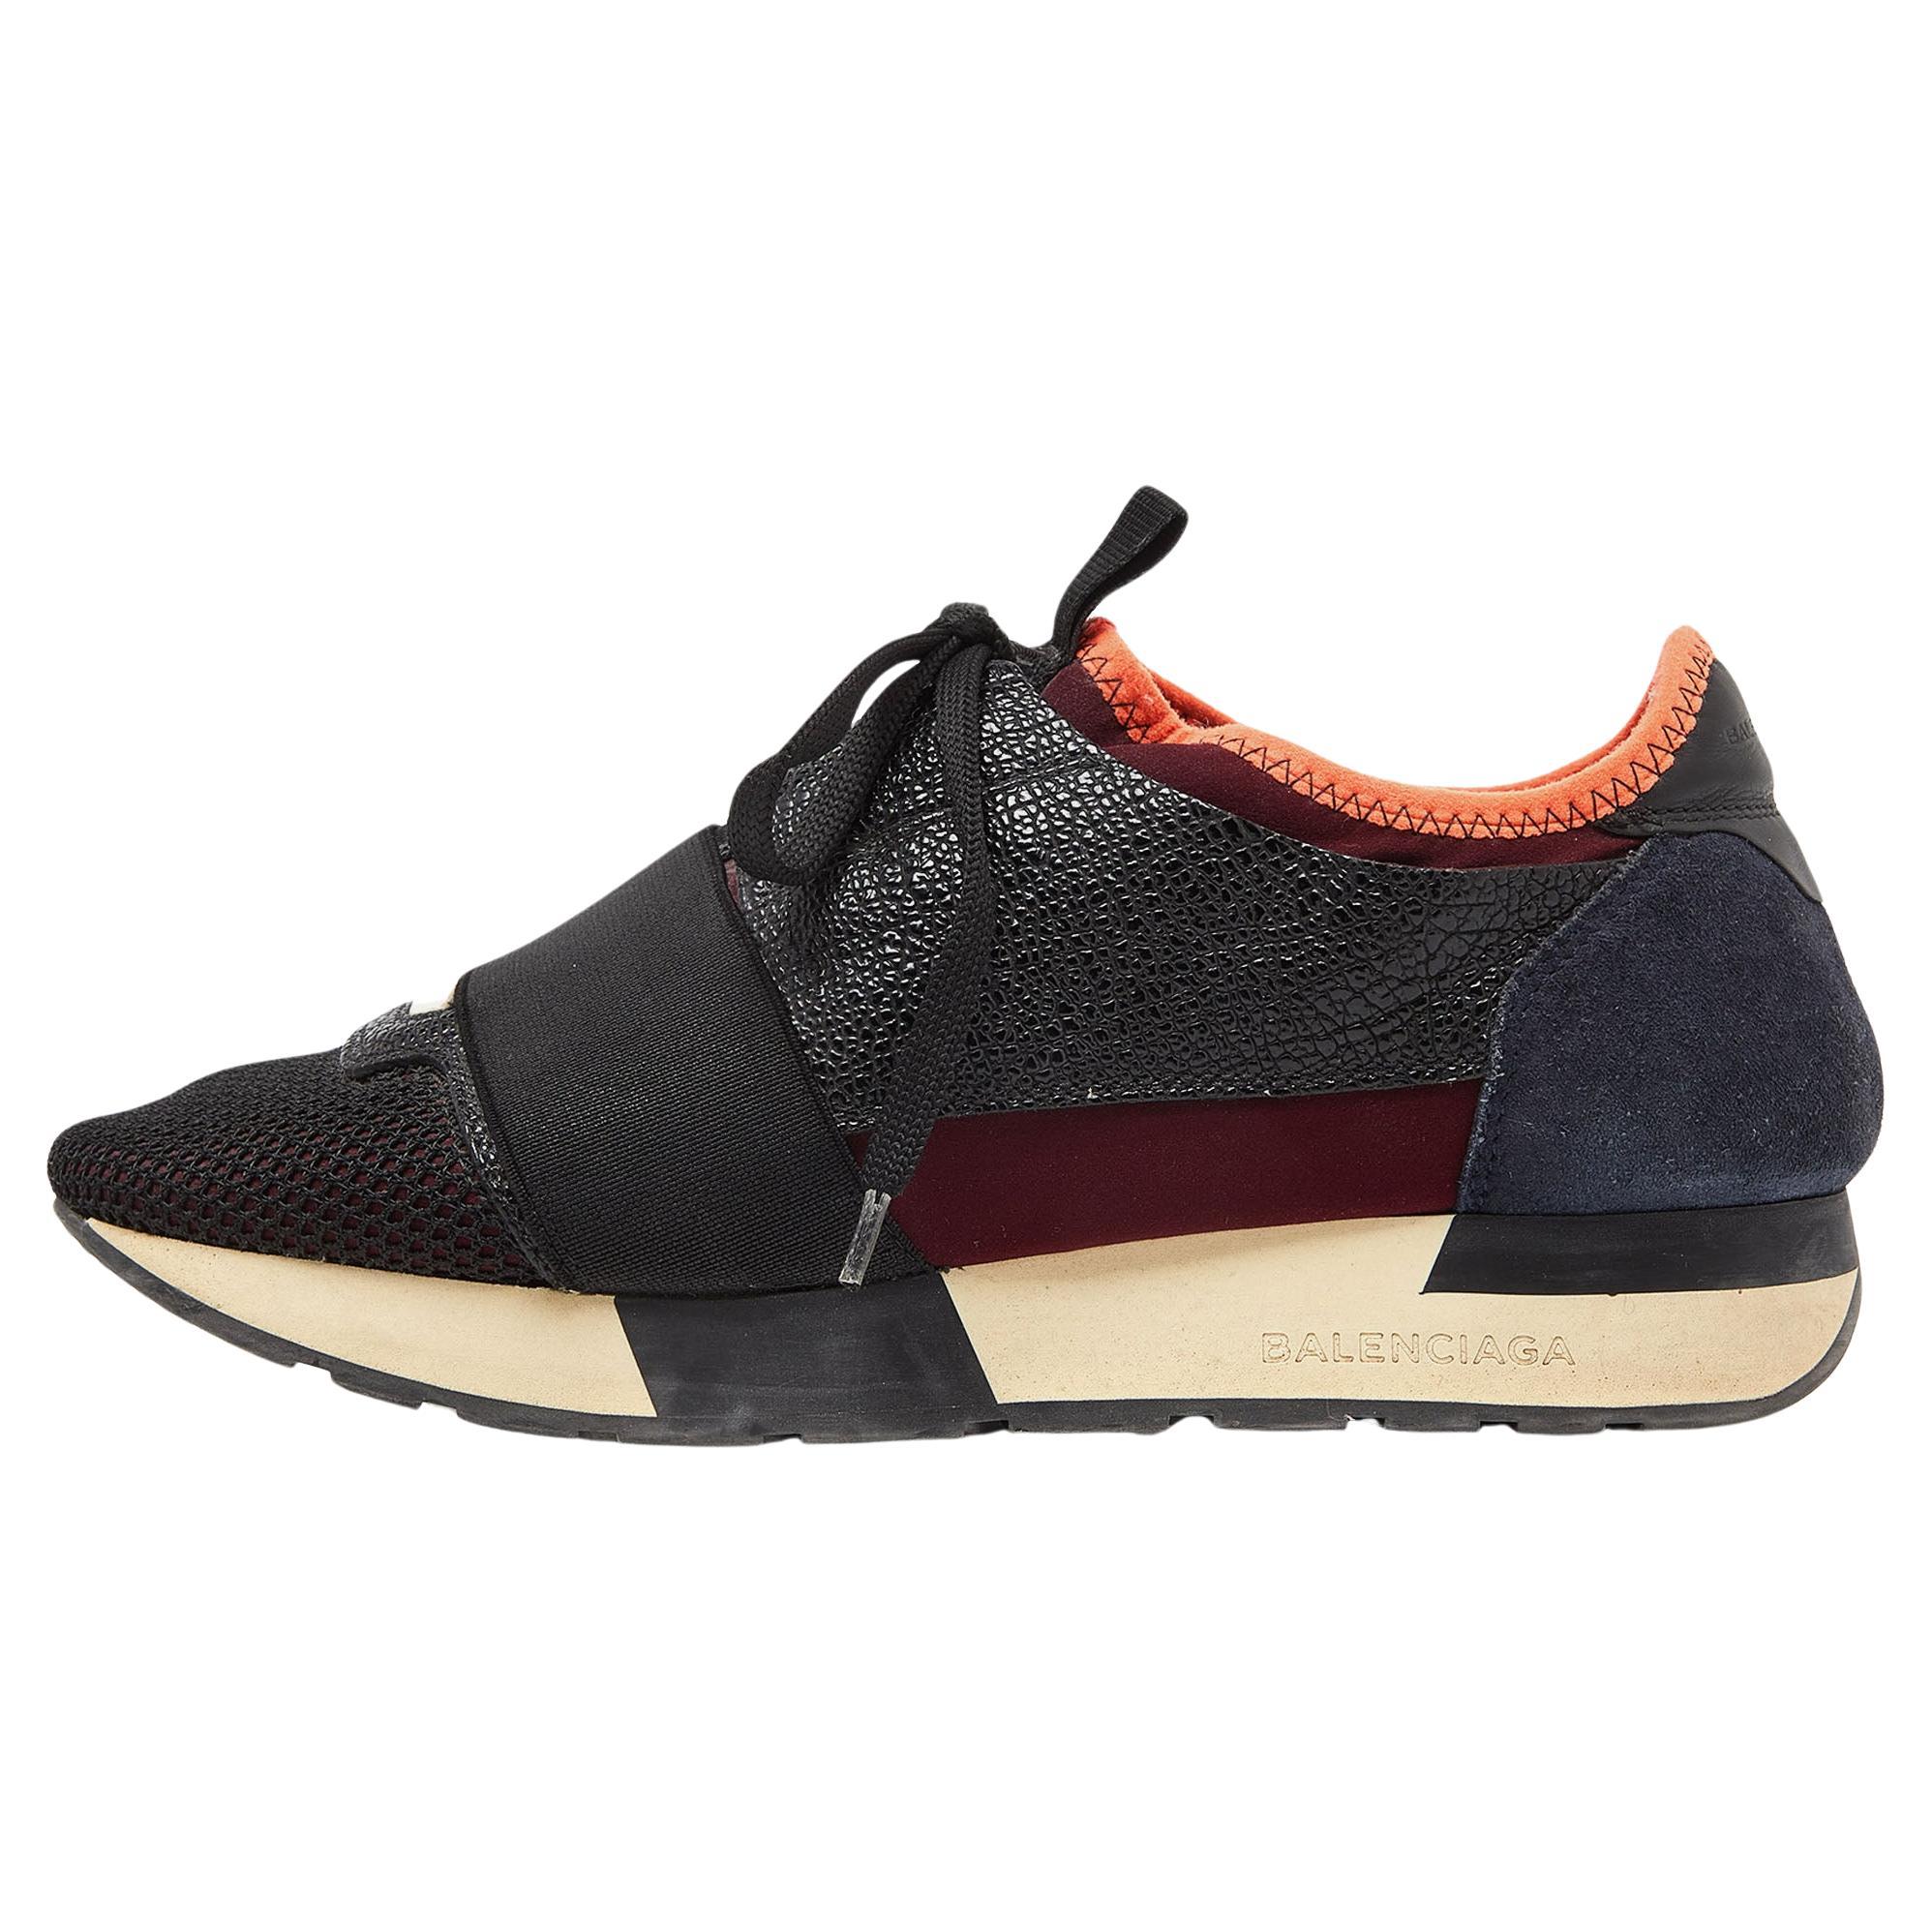 Balenciaga Tri Color Leather, Suede and Mesh Race Runner Sneakers Size 36 For Sale